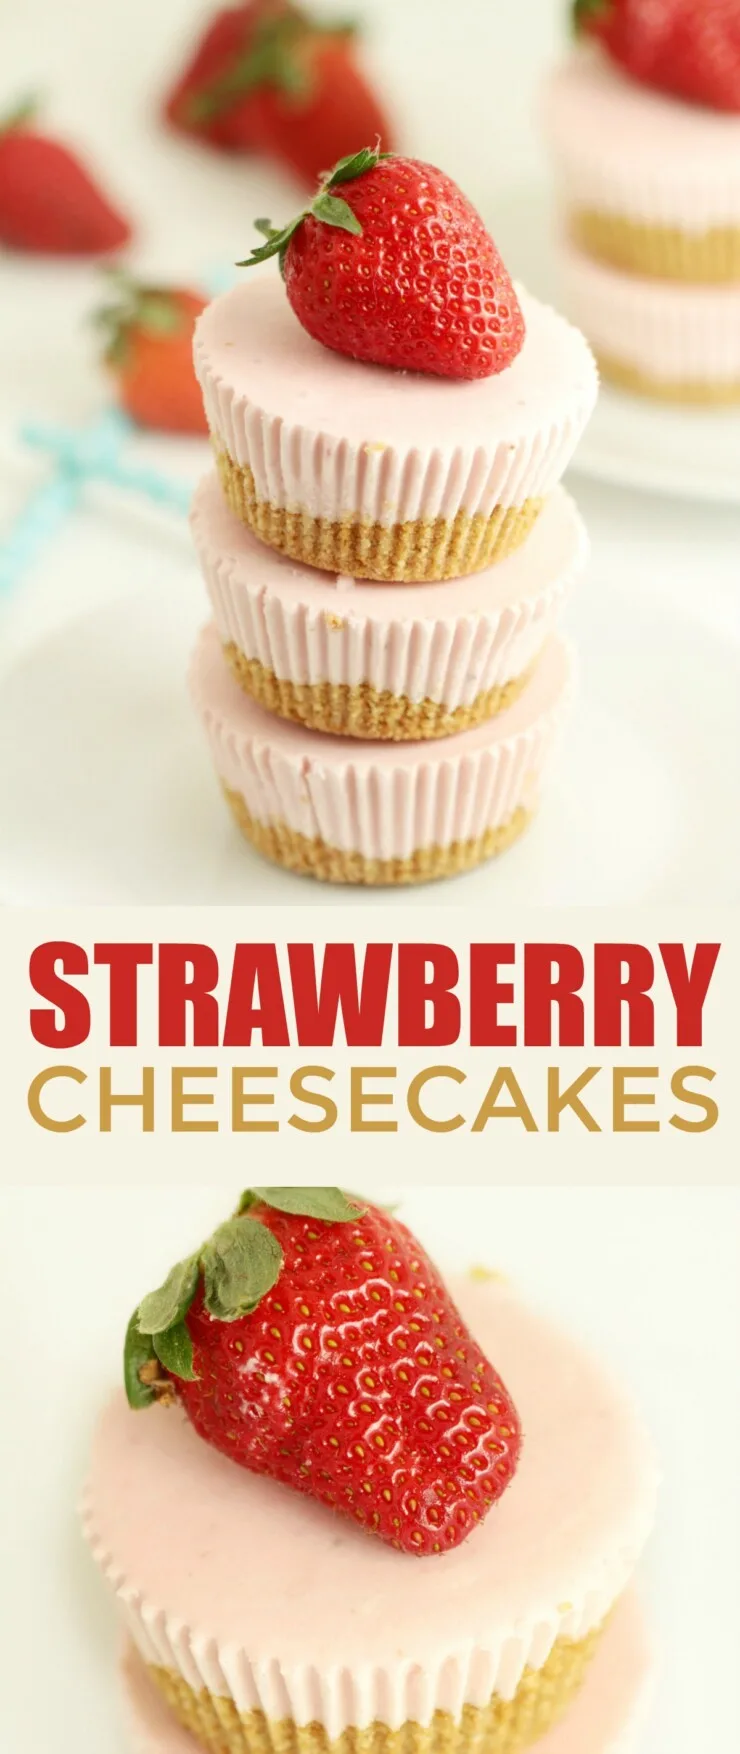  These Mini No Bake Strawberry Cheesecakes are beyond easy to make and are a great dessert year round. They features a buttery cookie crust topped off with a strawberry cheesecake filling – delicious frozen or at room temperature.